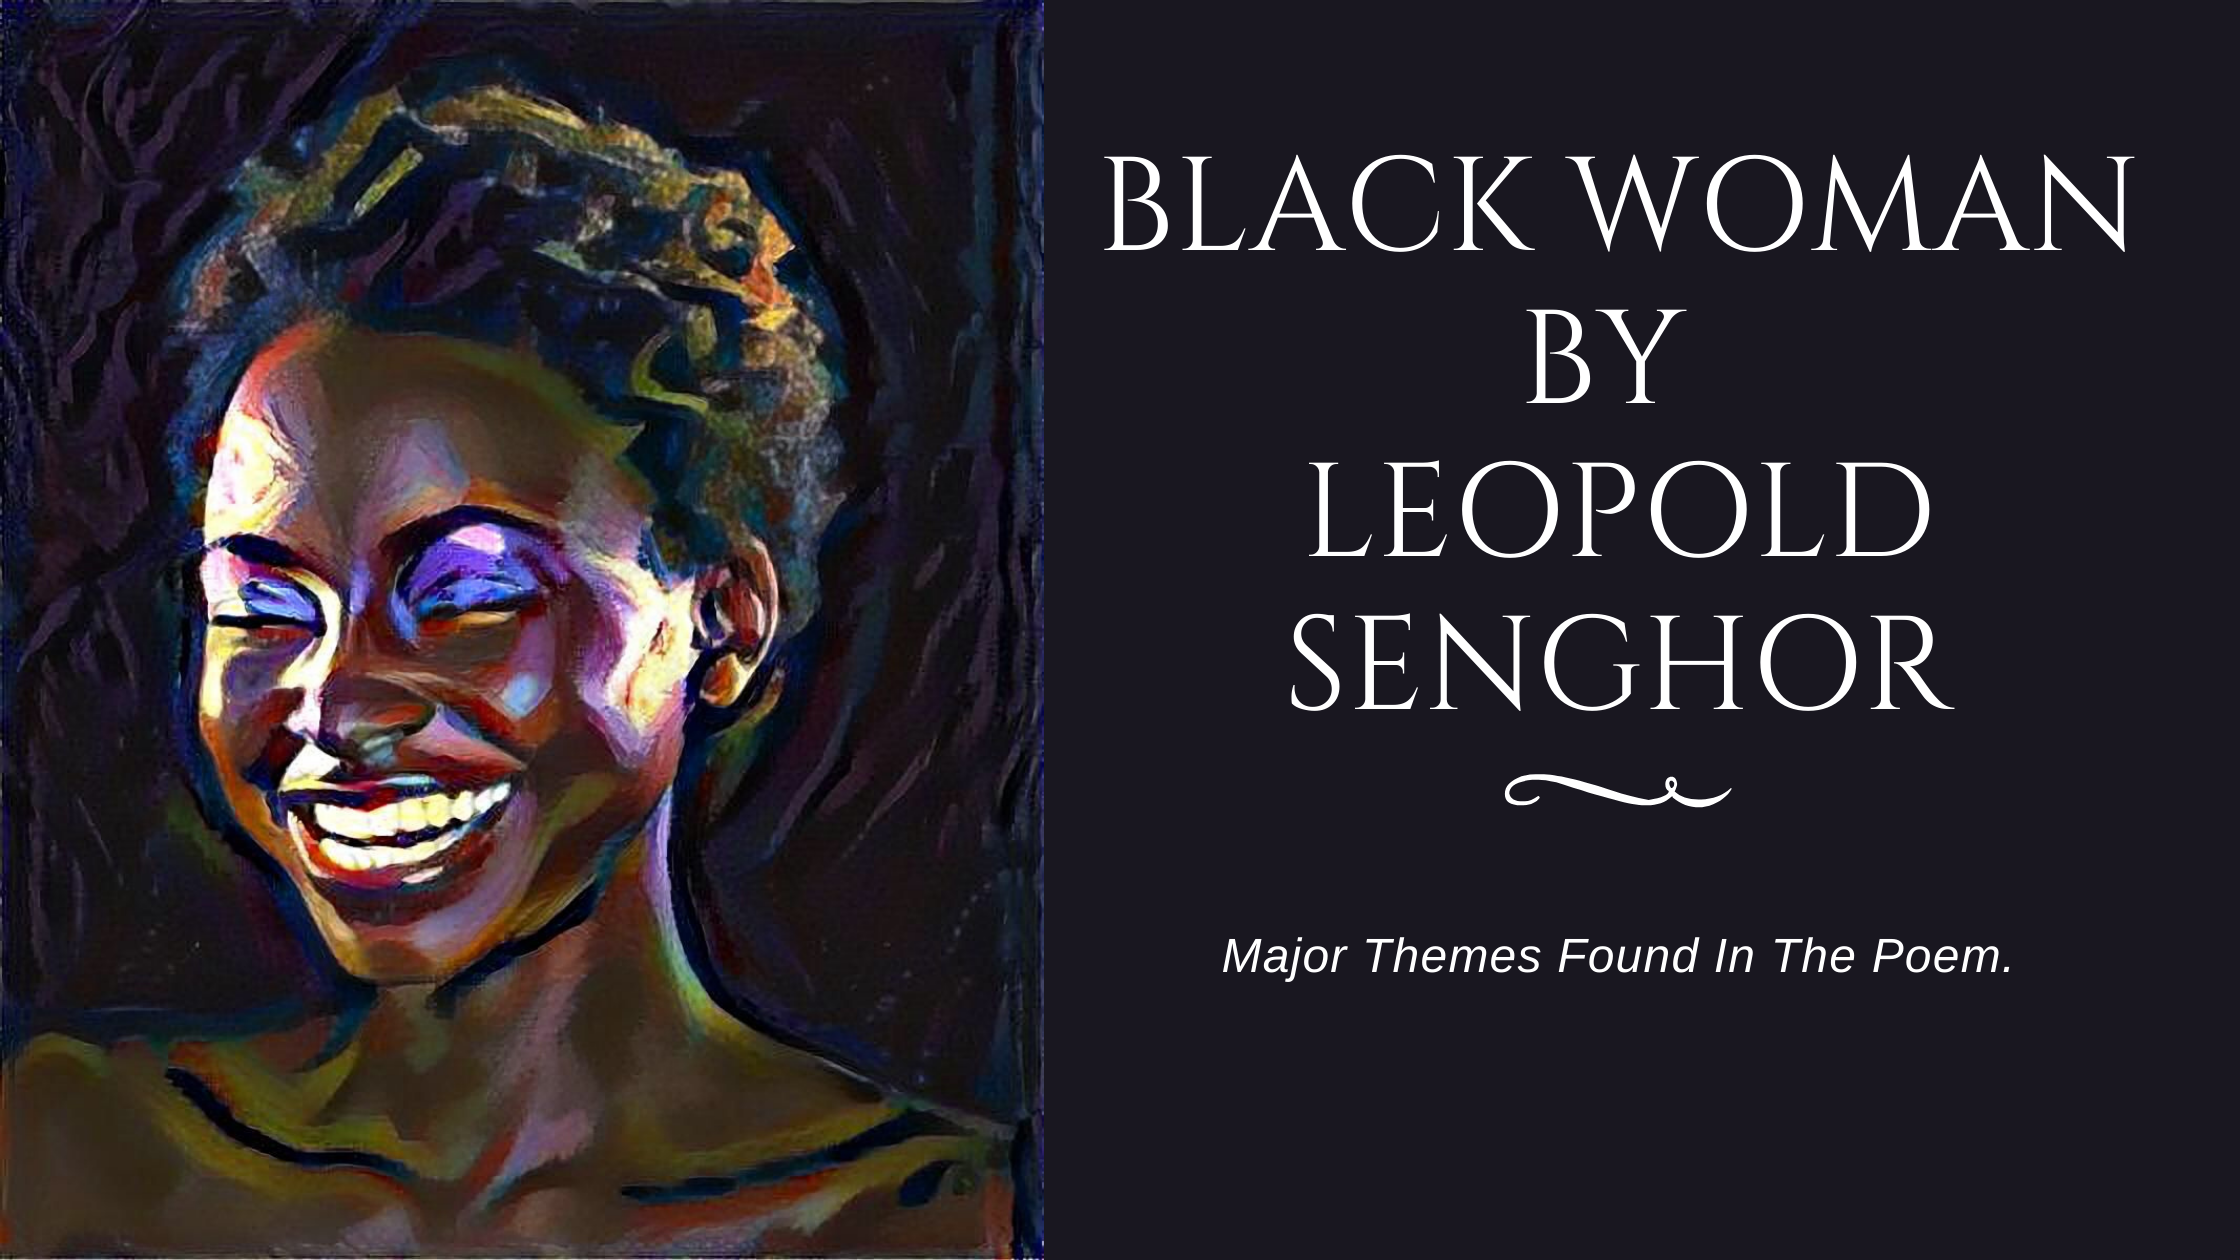 The Major Themes in The Black Woman by Leopold Senghor